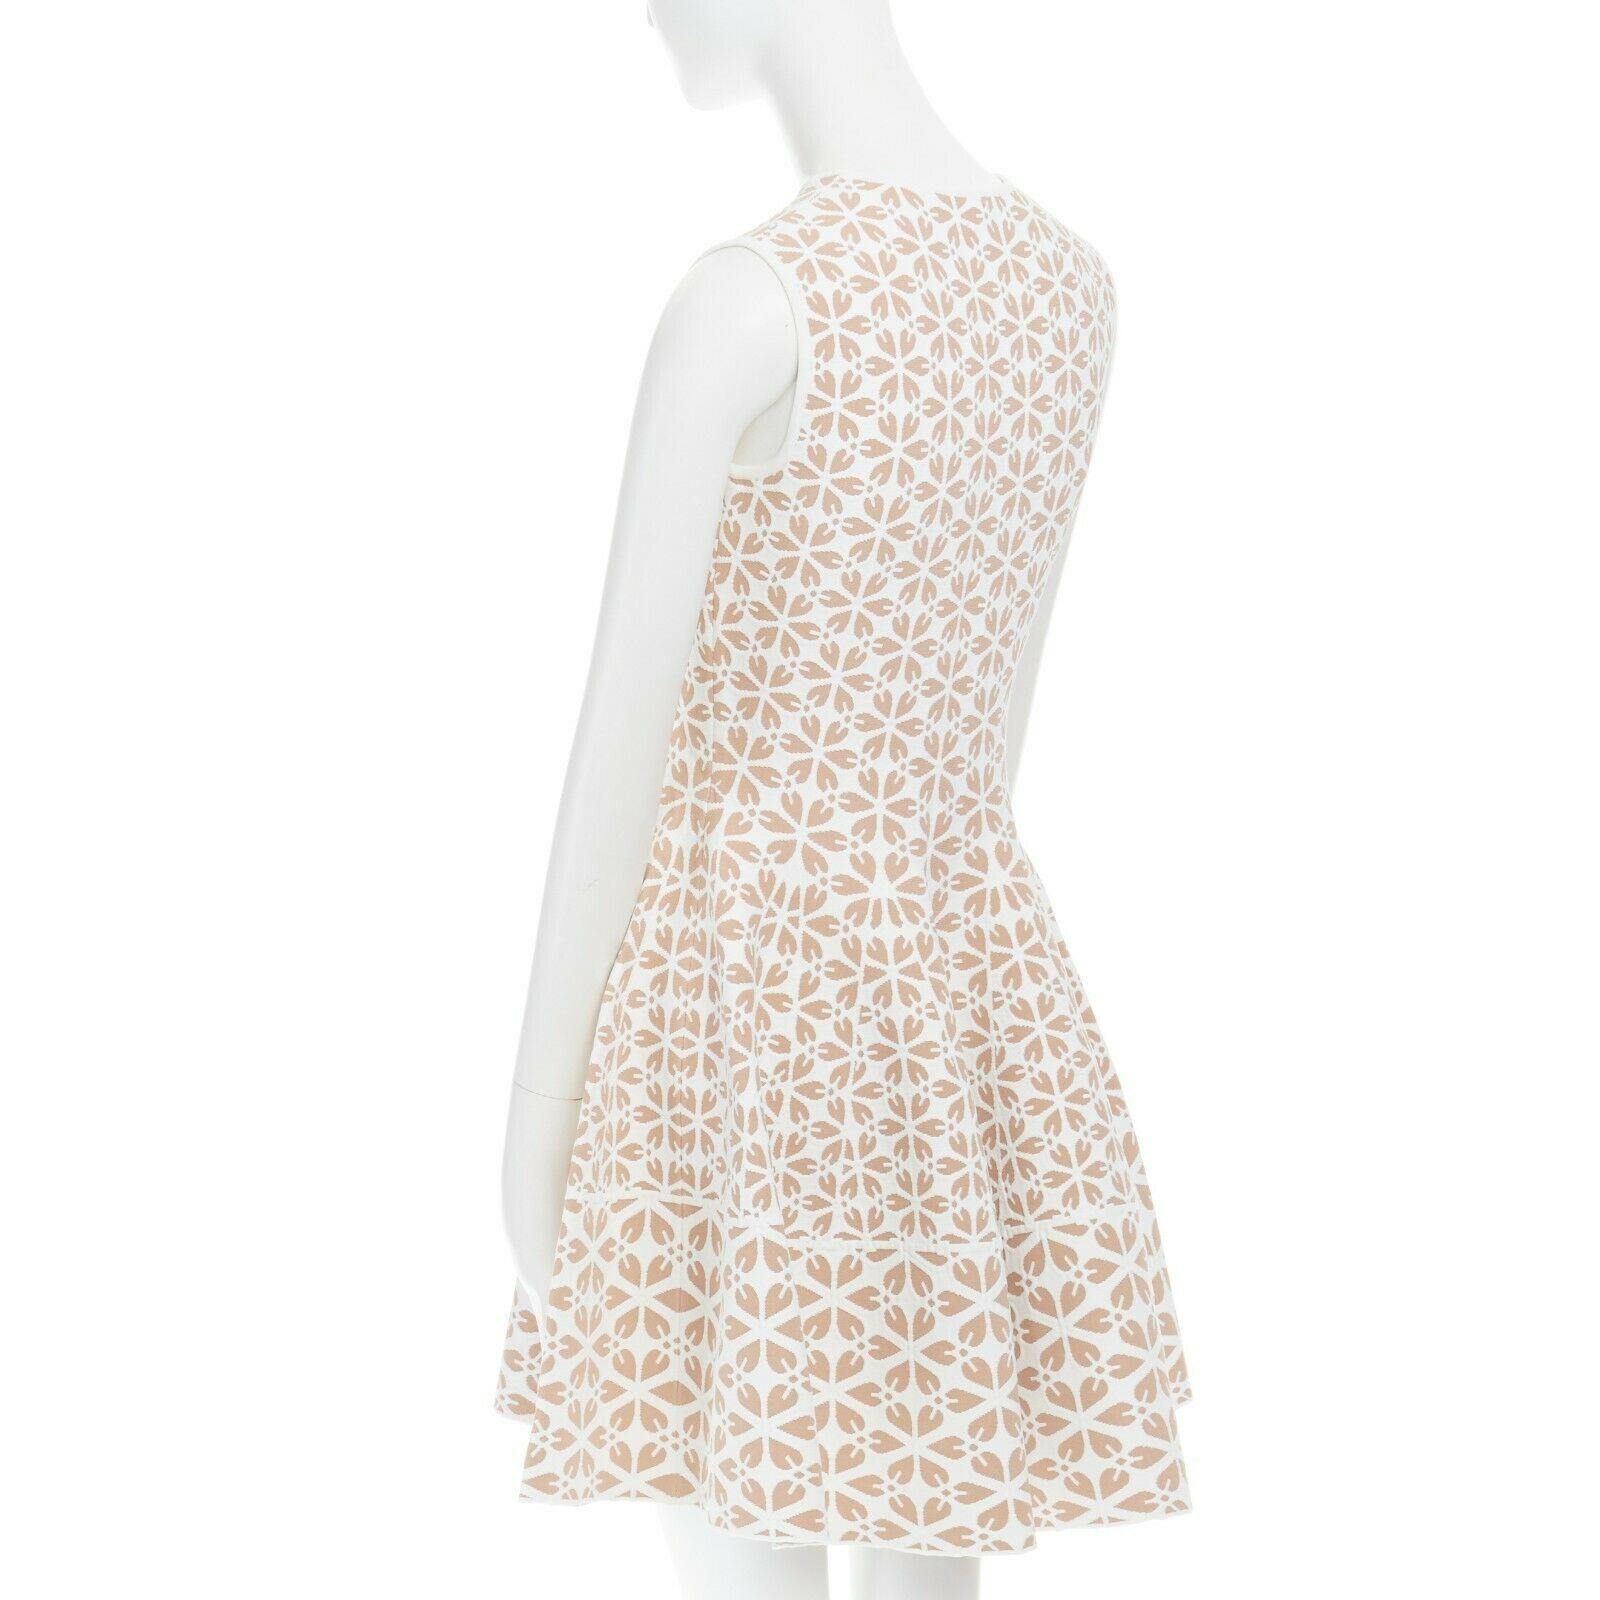 ALEXANDER MCQUEEN white nude geomtric leaf pattern jacquard fit flare dress M 1